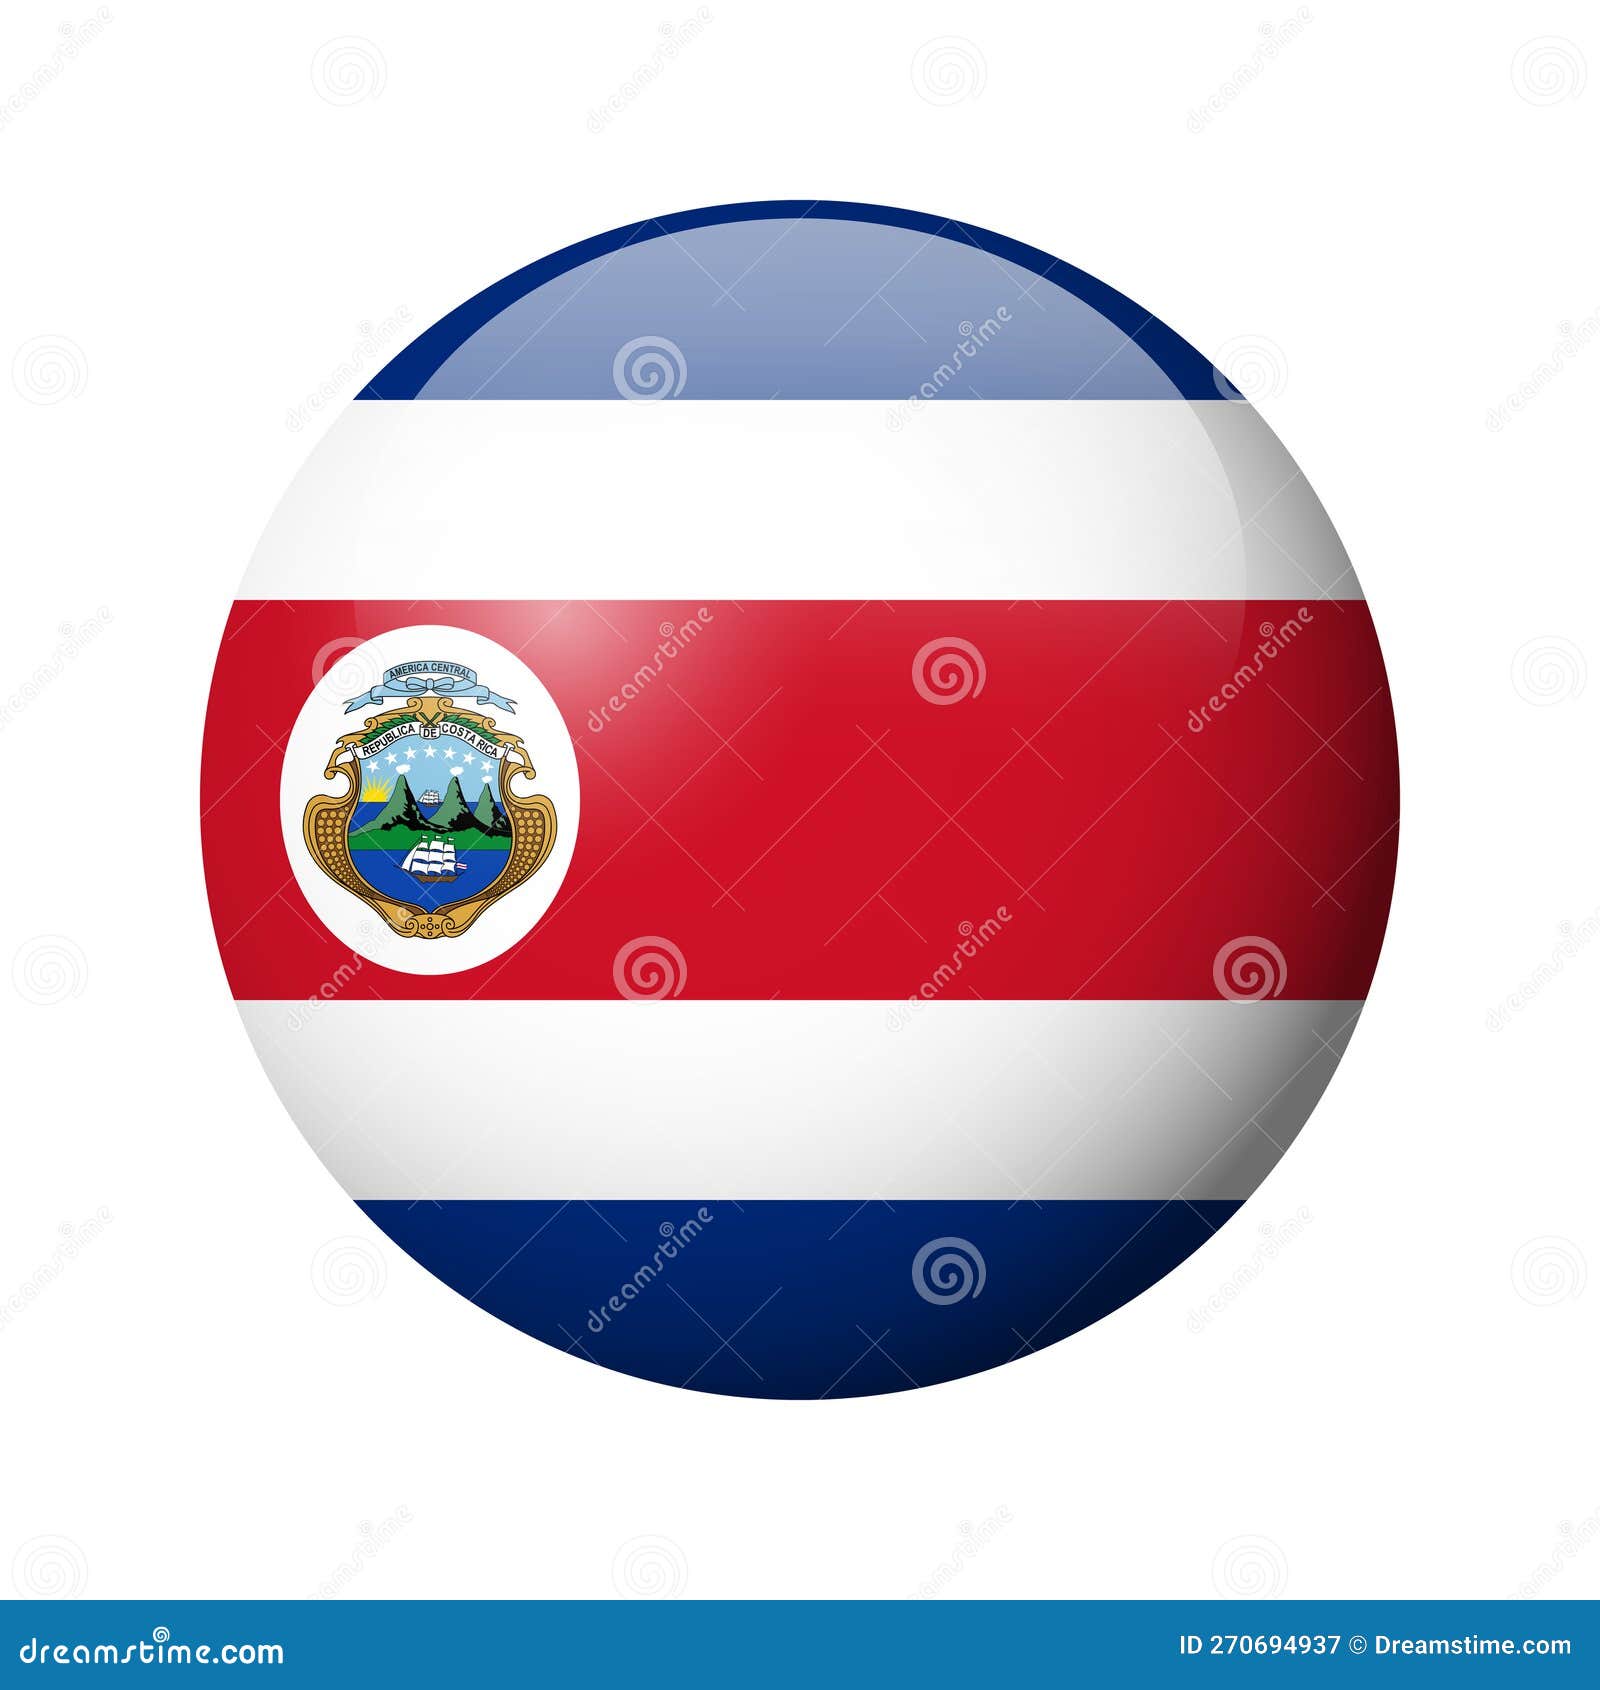 Glossy Circle Badge Flag of Costa Rica Stock Vector - Illustration of ...